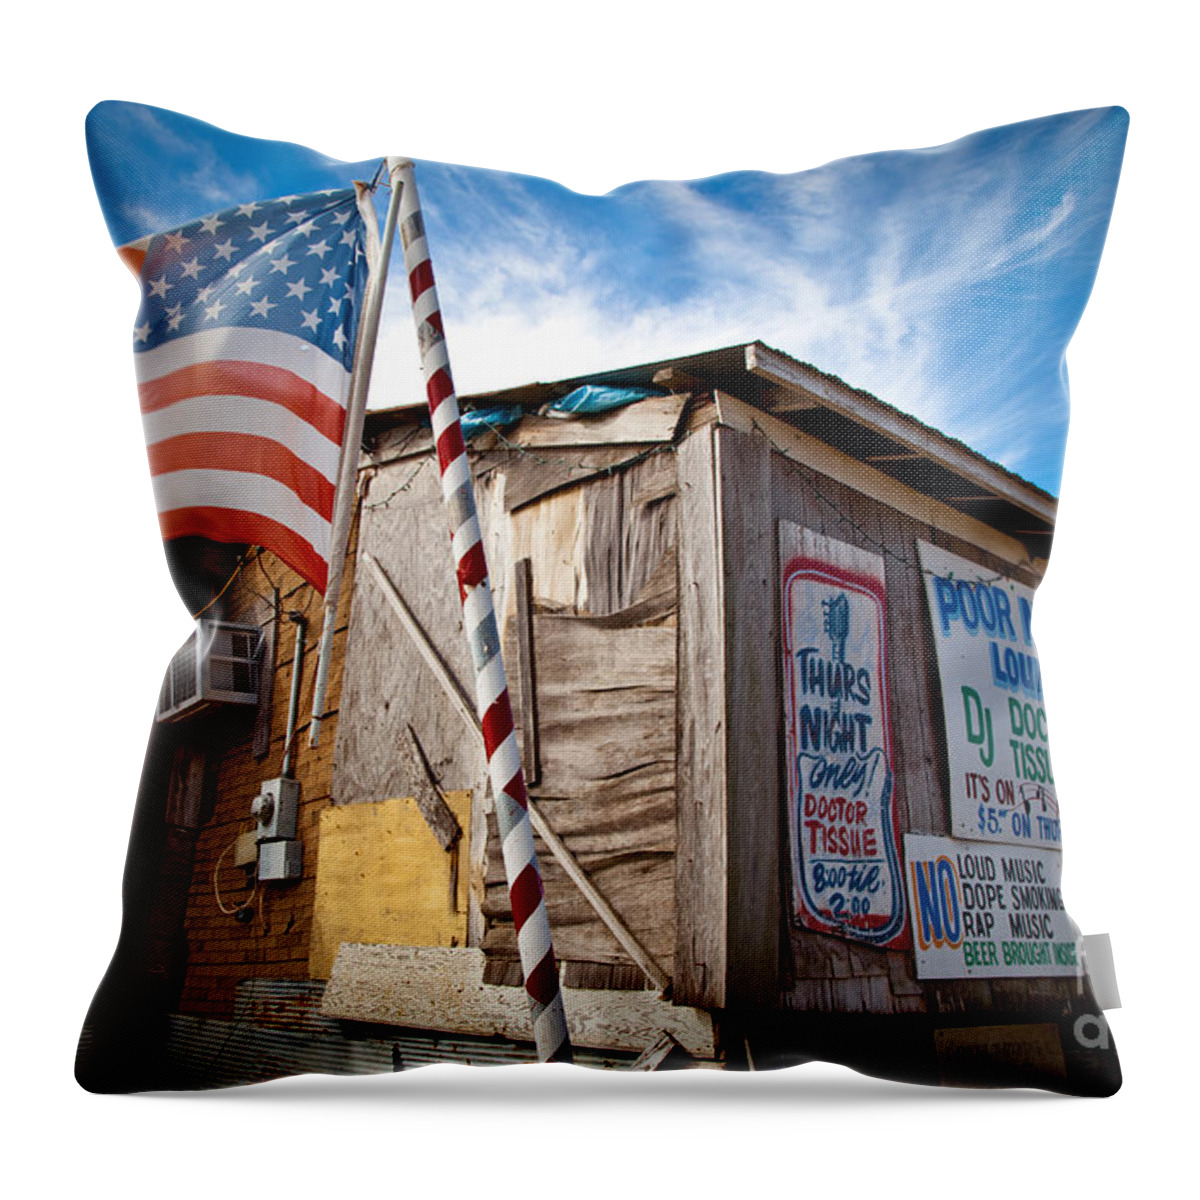 Po Monkey Throw Pillow featuring the photograph Po Monkeys Lounge Merigold Mississippi by T Lowry Wilson